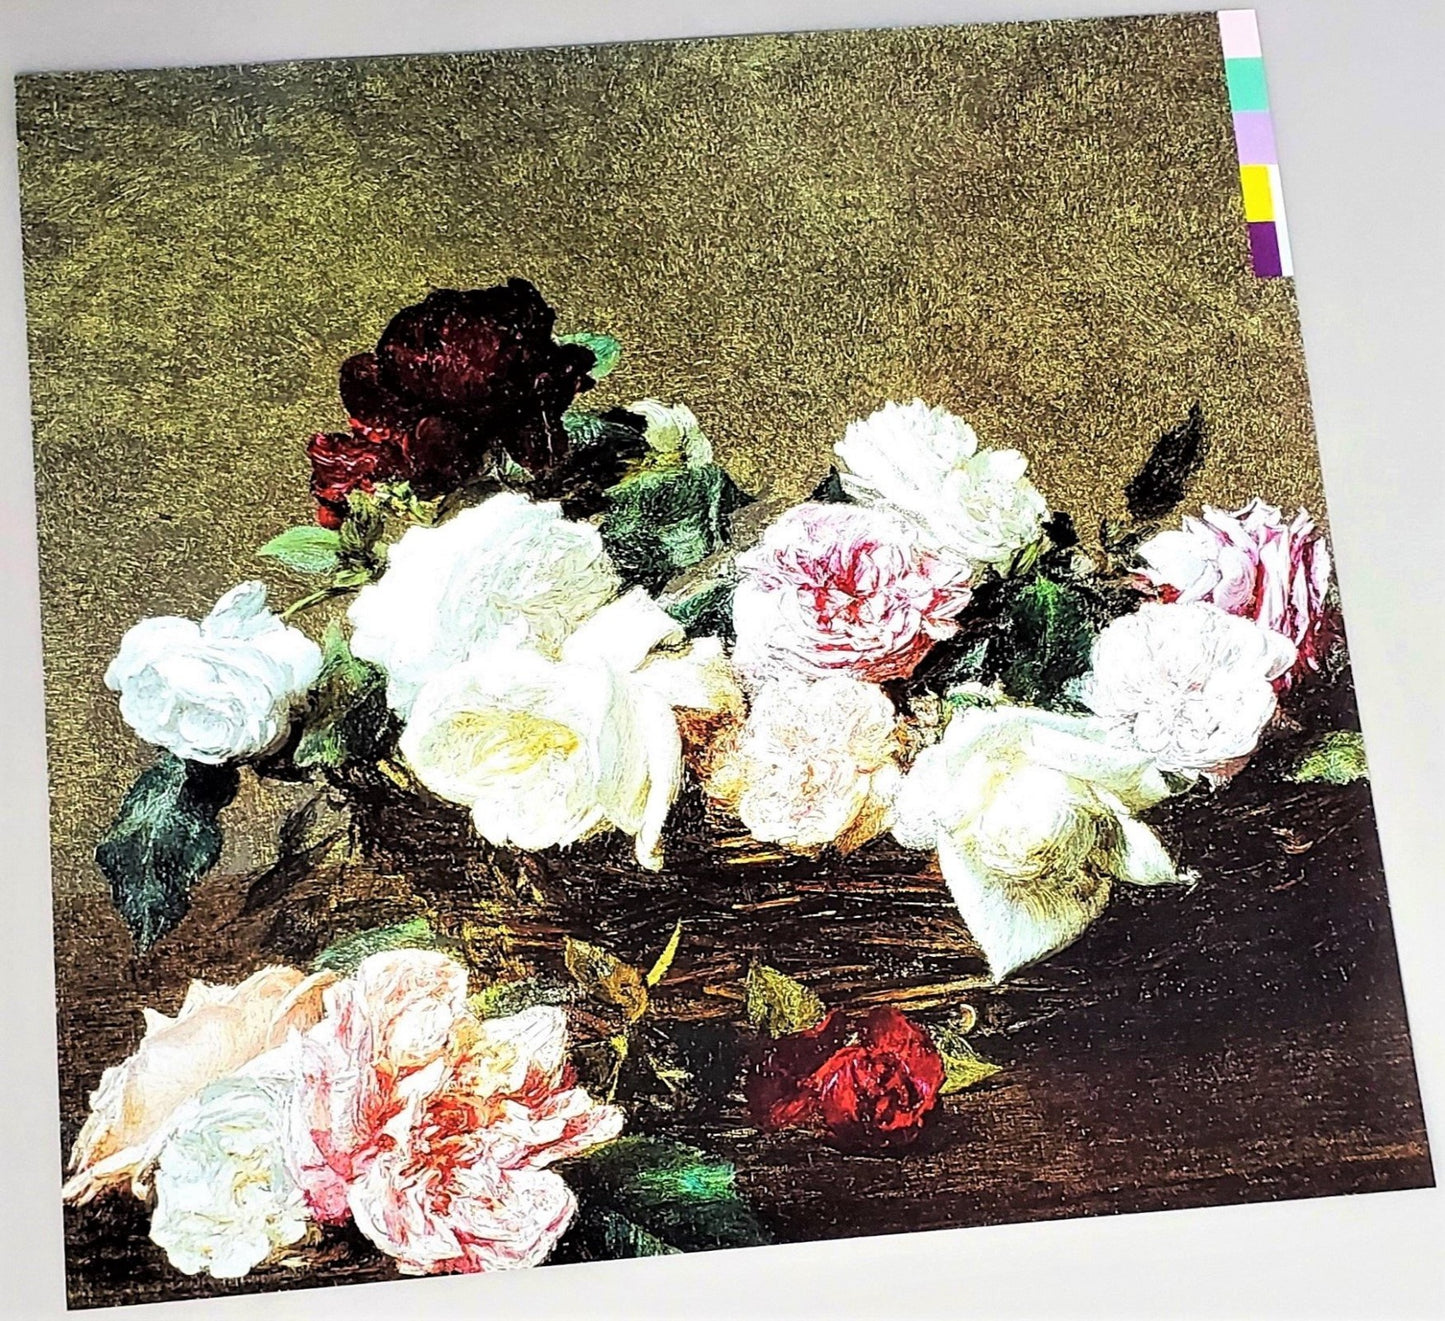 New Order 1983 Power, Corruption & Lies album cover art page featured in Rock Covers 2014 coffee table book